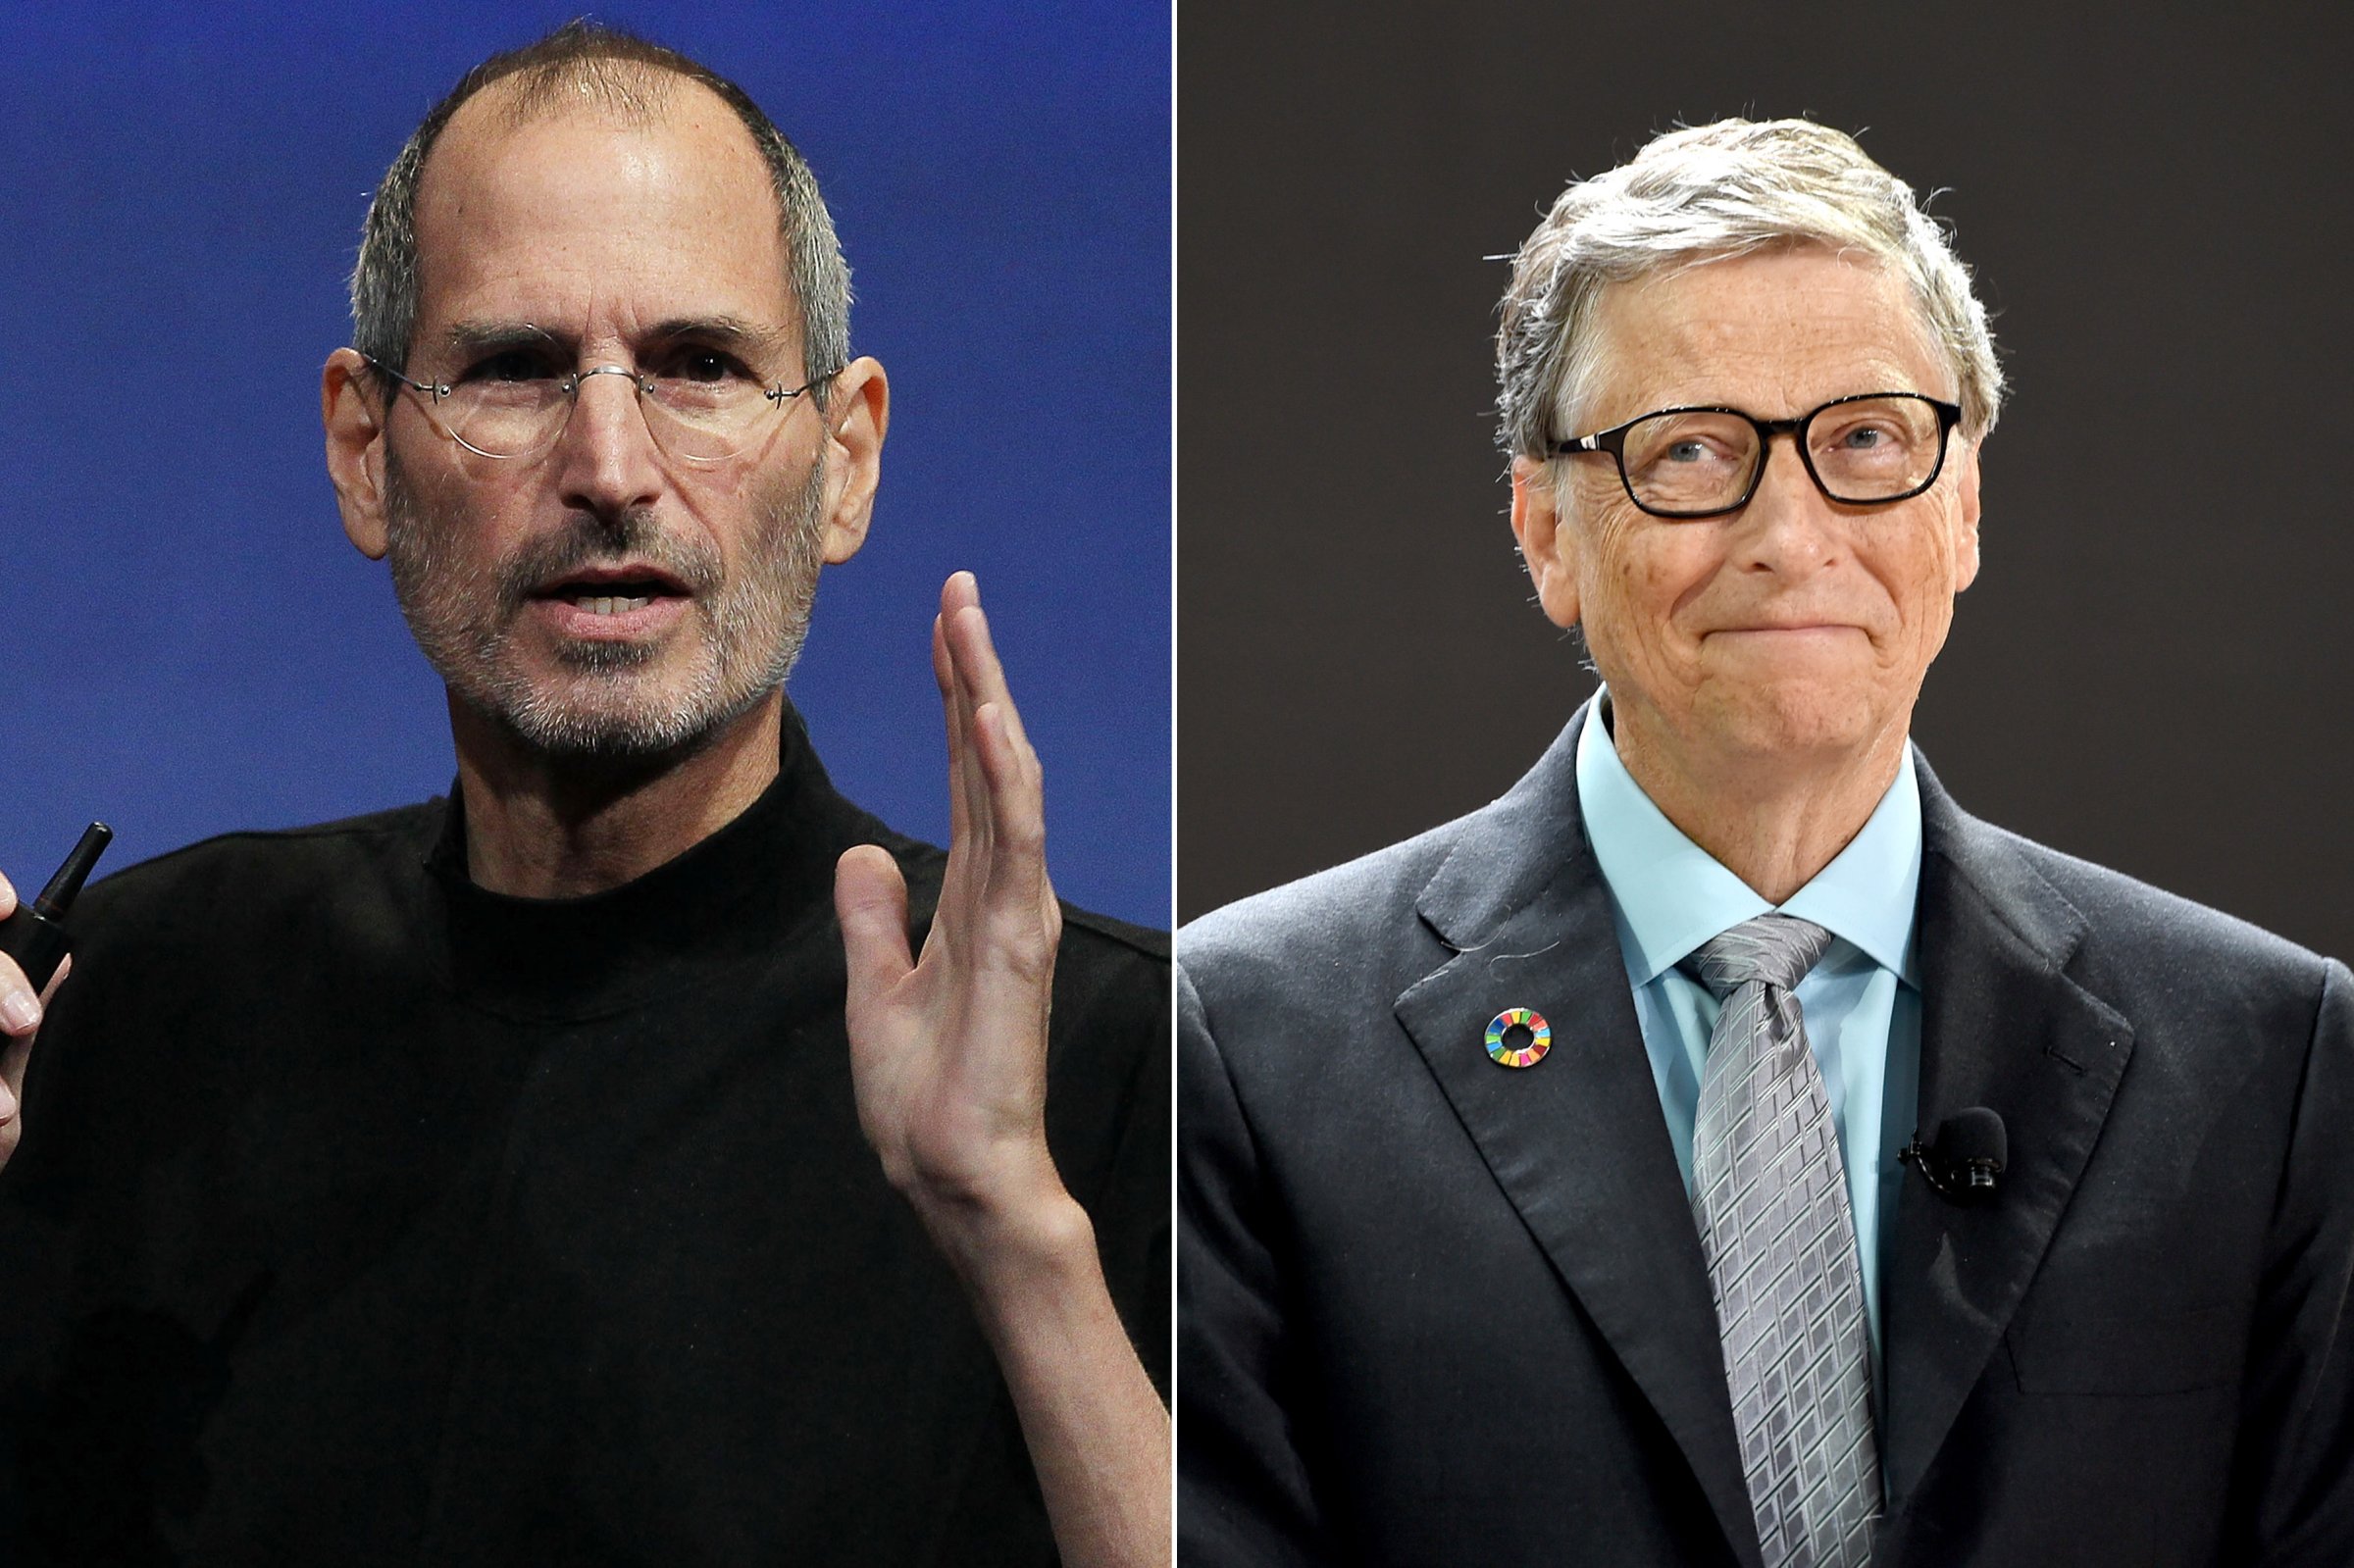 Parents-Can-Learn-From-Steve Jobs-Bill-Gates